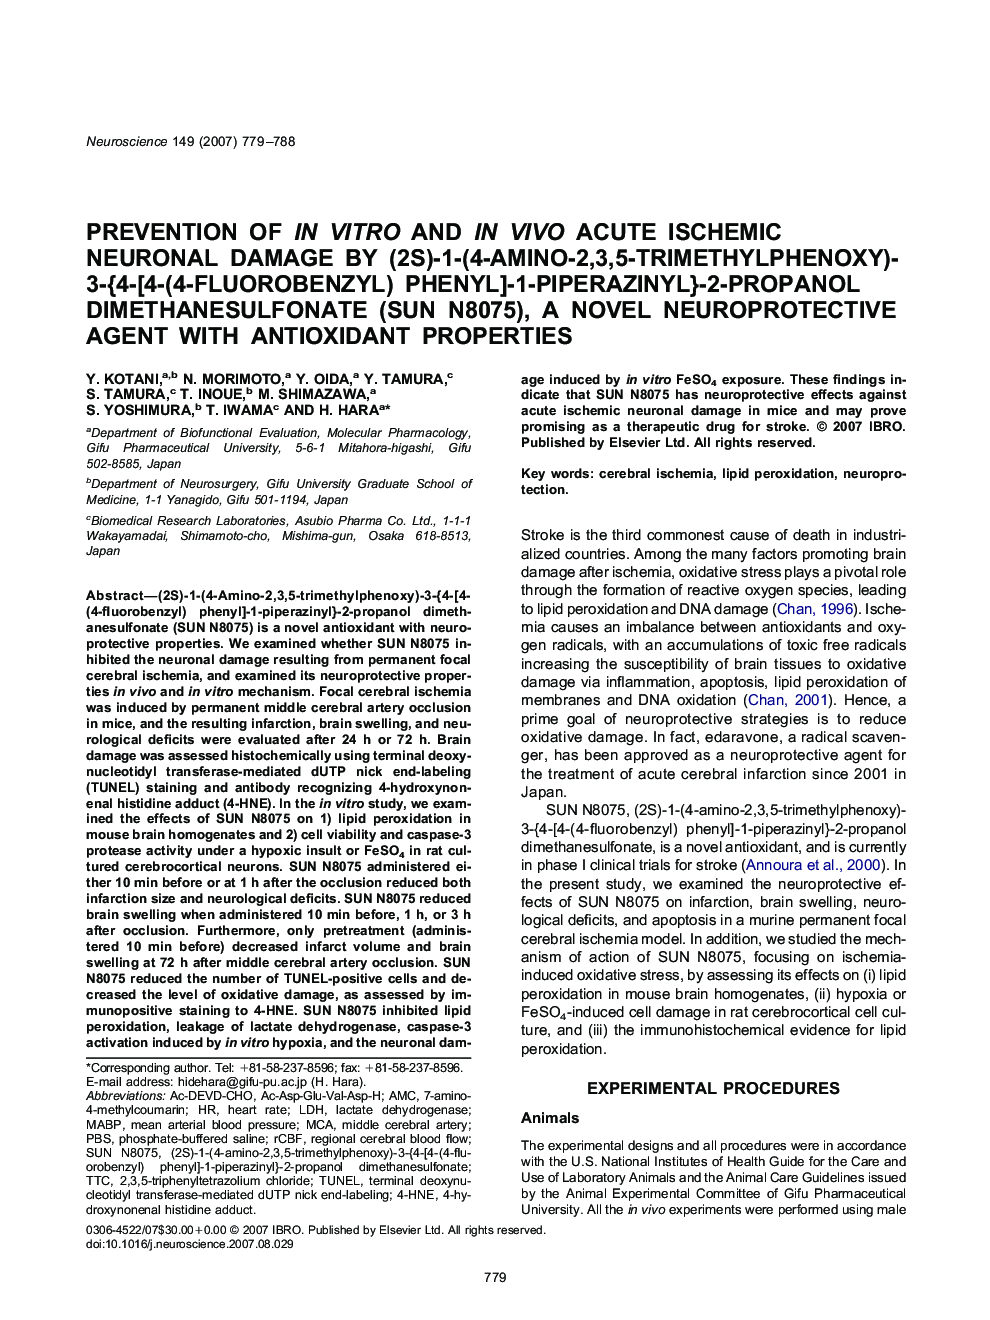 Prevention of in vitro and in vivo acute ischemic neuronal damage by (2S)-1-(4-amino-2,3,5-trimethylphenoxy)-3-{4-[4-(4-fluorobenzyl) phenyl]-1-piperazinyl}-2-propanol dimethanesulfonate (SUN N8075), a novel neuroprotective agent with antioxidant properti